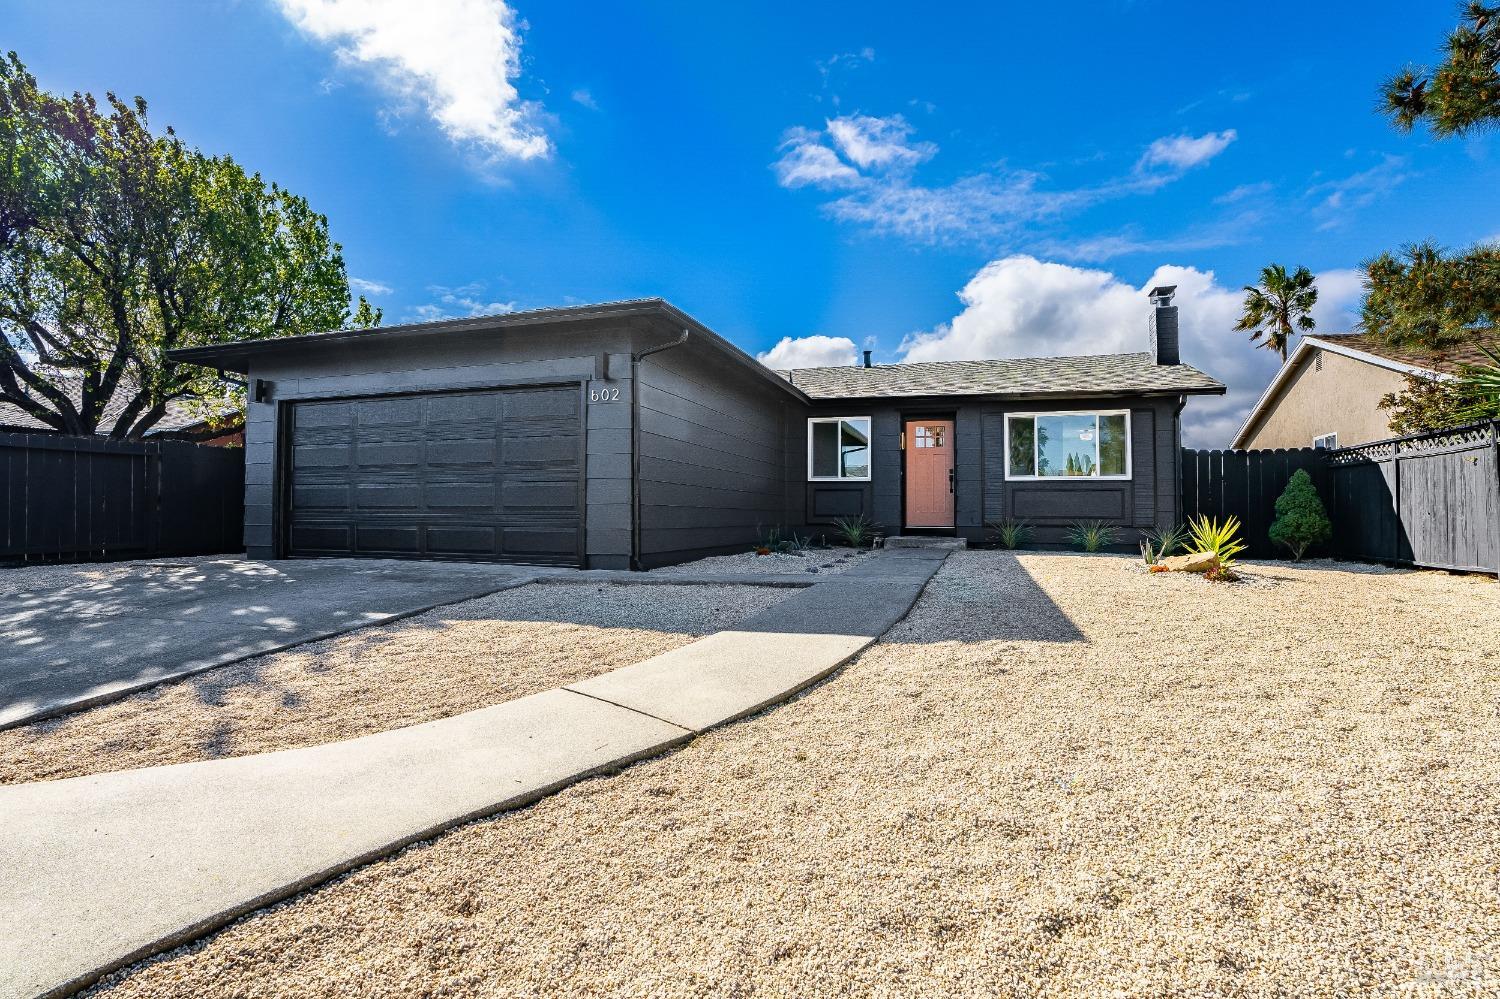 Discover your dream home in the heart of Suisun City! Freshly remodeled, this stunning 3-bedroom, 2-